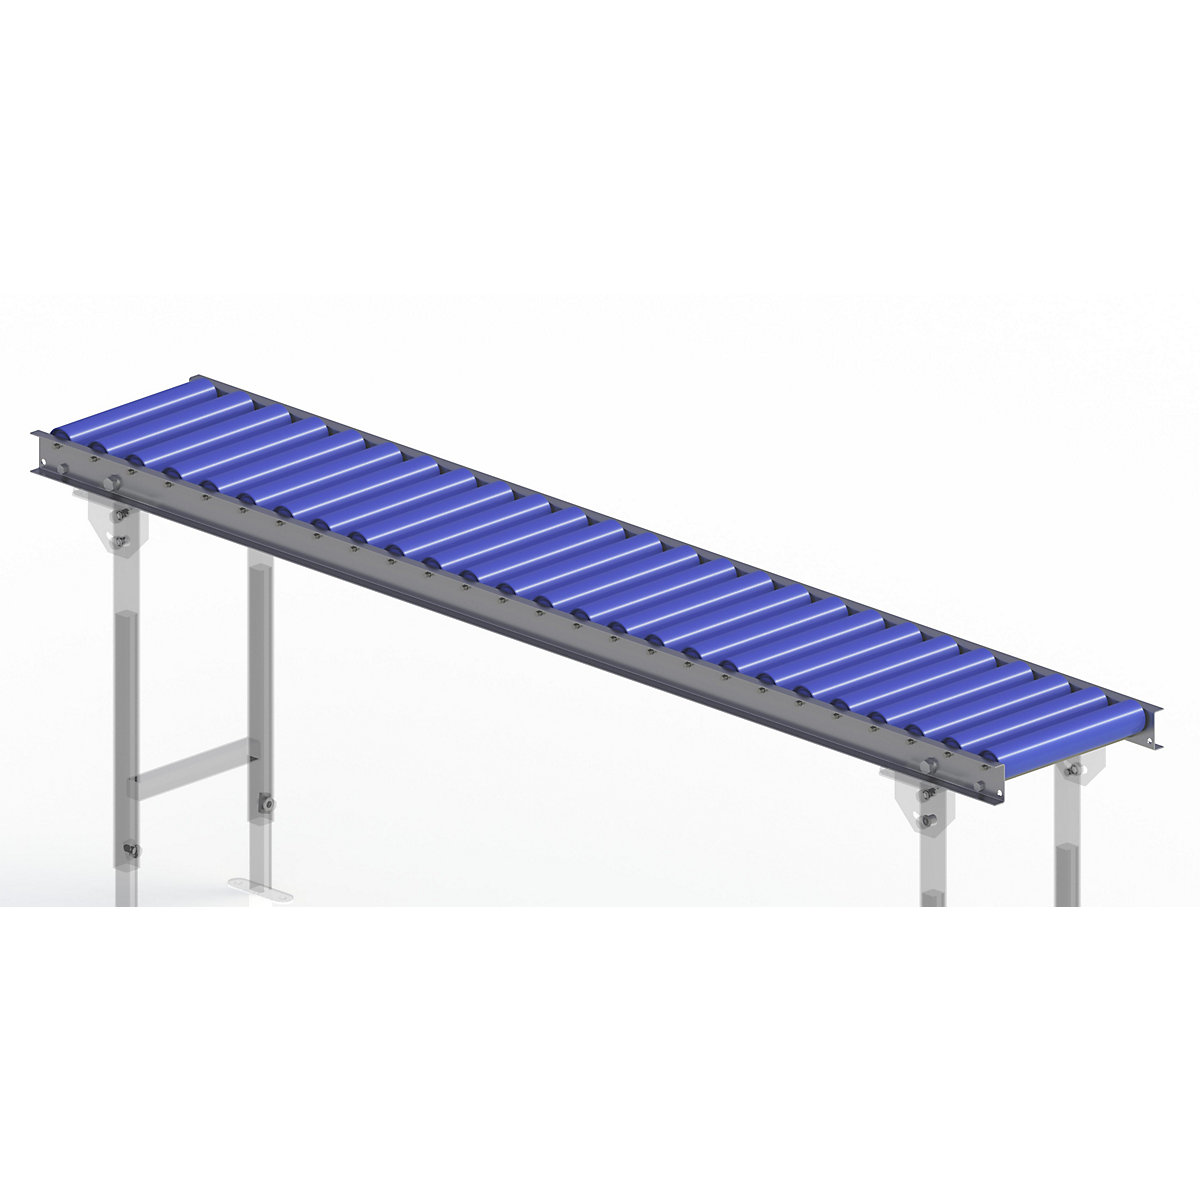 Gura – Light duty roller conveyor, steel frame with plastic rollers, track width 300 mm, axle spacing 75 mm, length 2.0 m